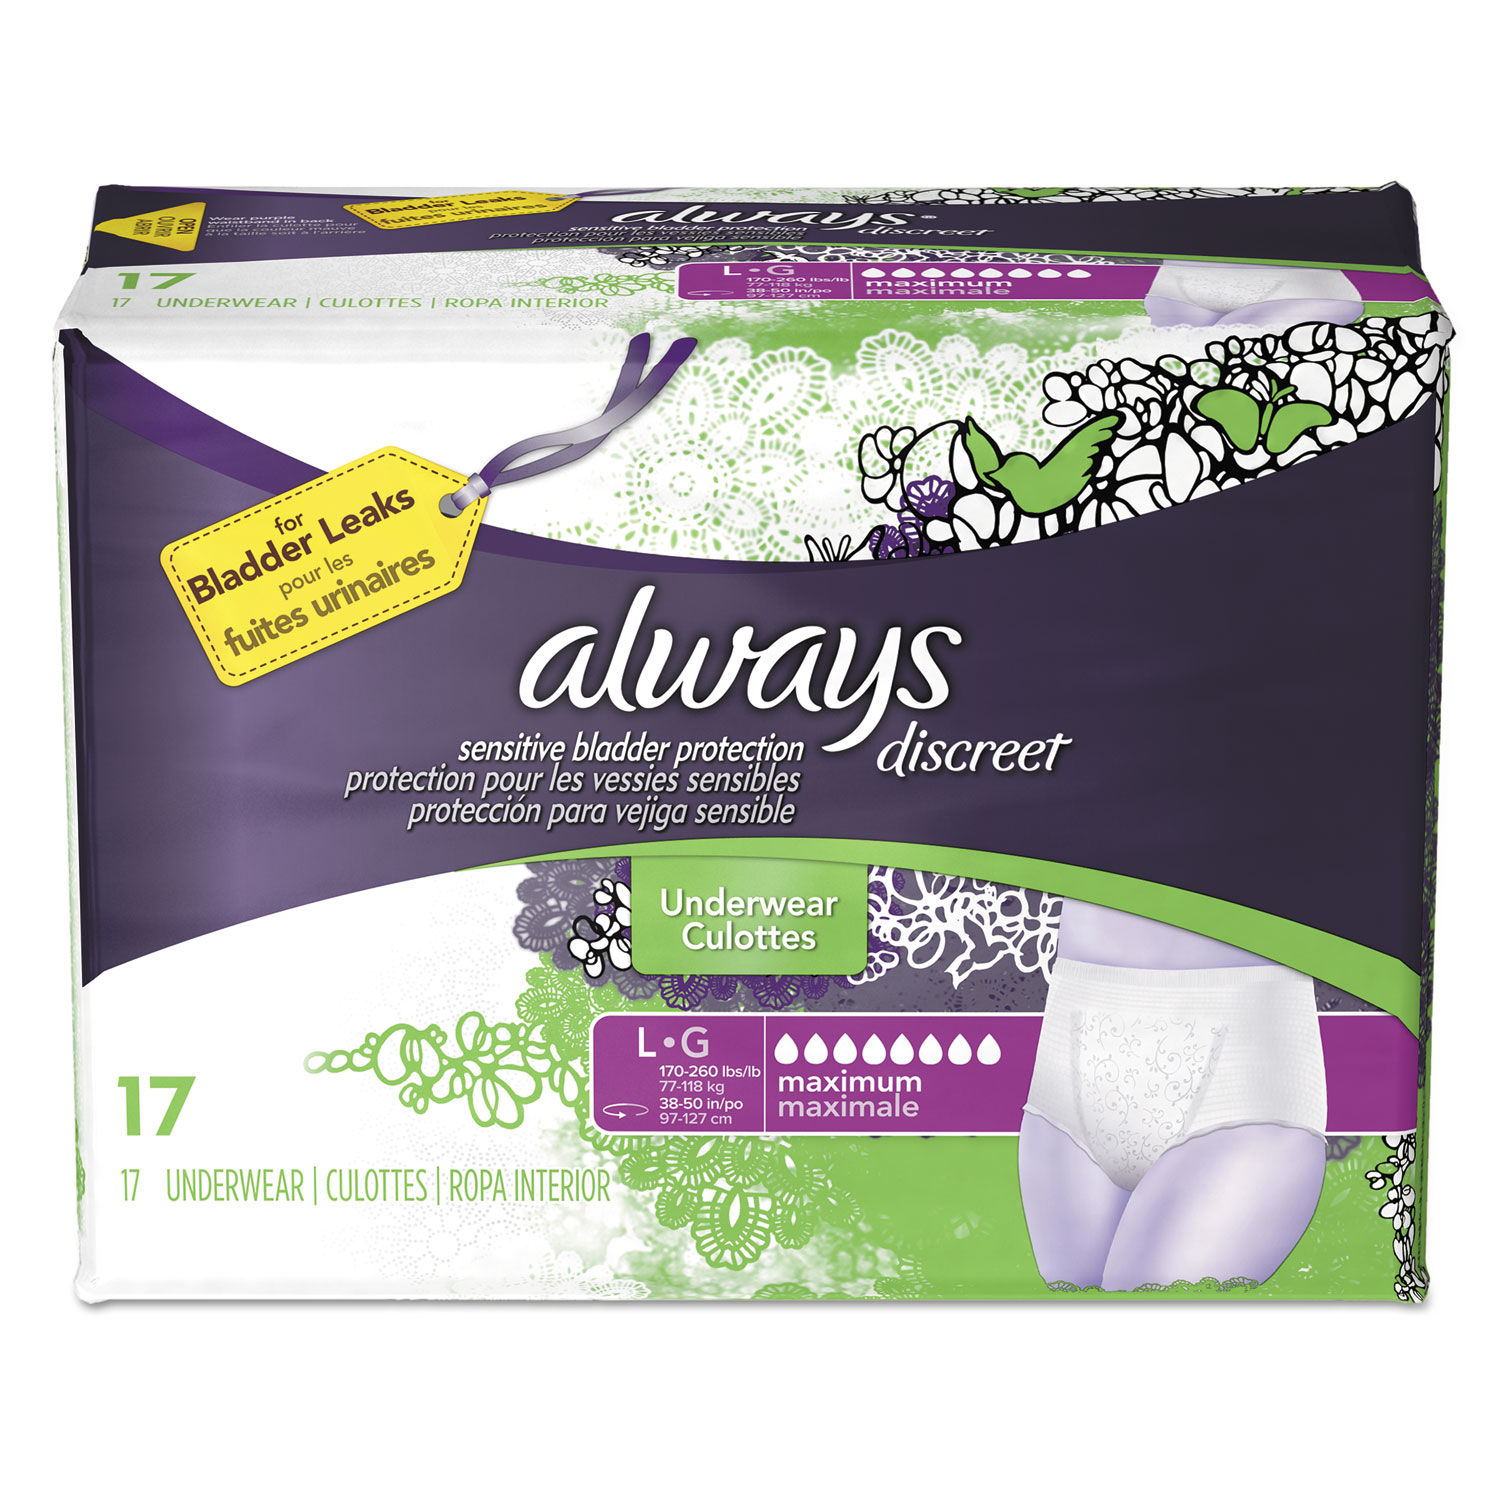 Discreet Incontinence Underwear Large, Maximum Absorbency, 17/Pack, 3 Packs/Carton